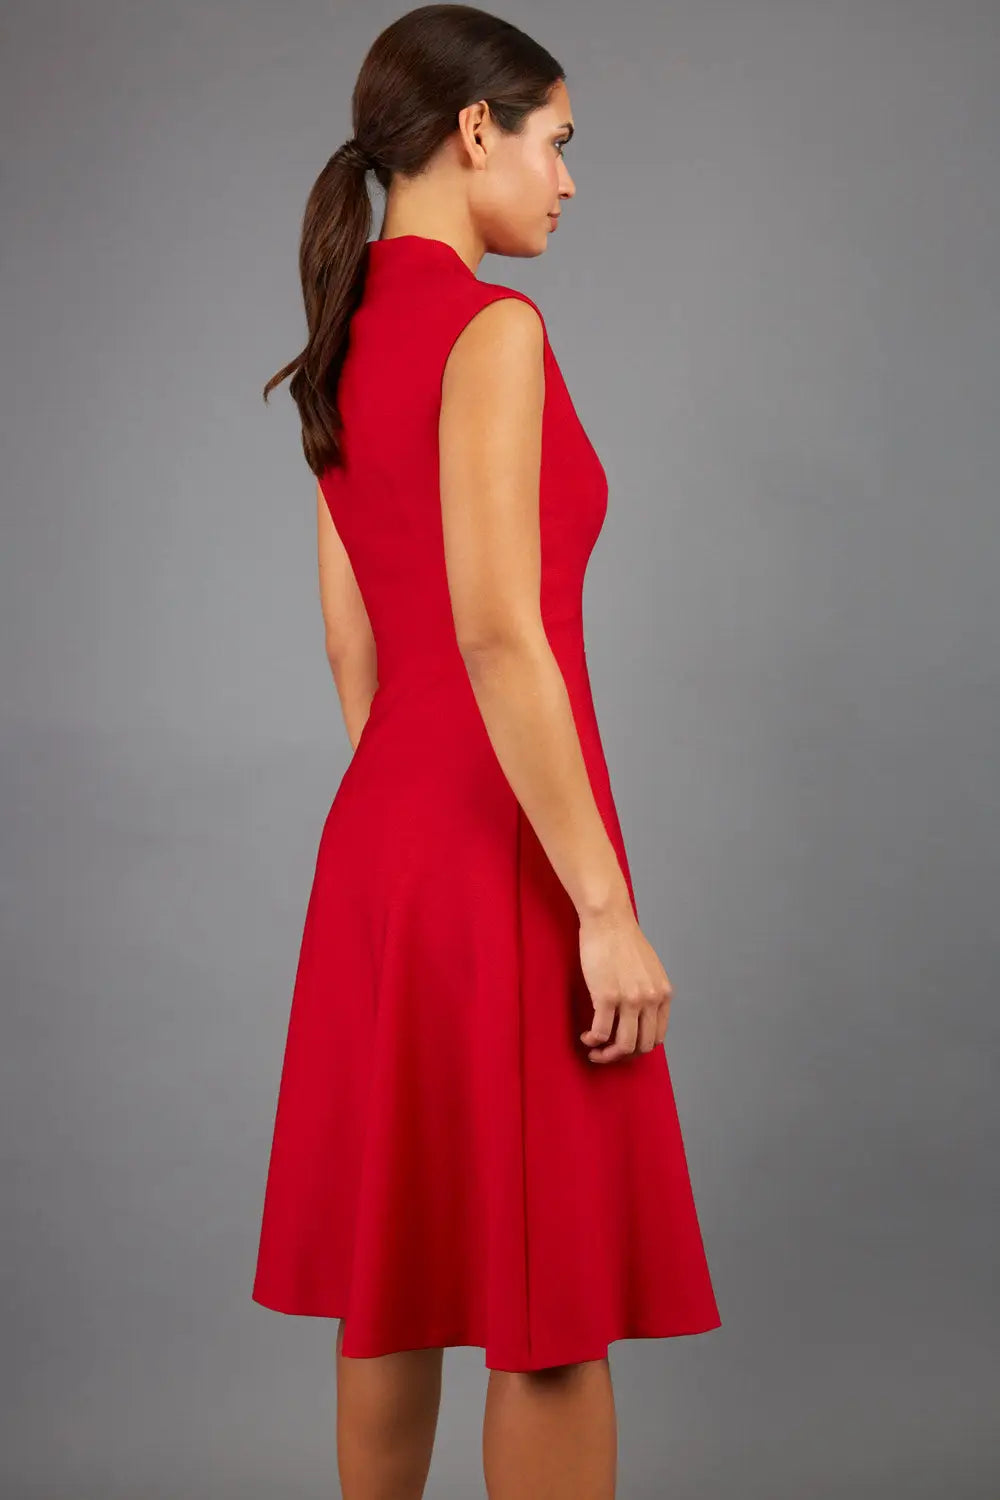 Women' Business Rio Dress - Cardinal Red NORA GARDNER | OFFICIAL STORE for work and office